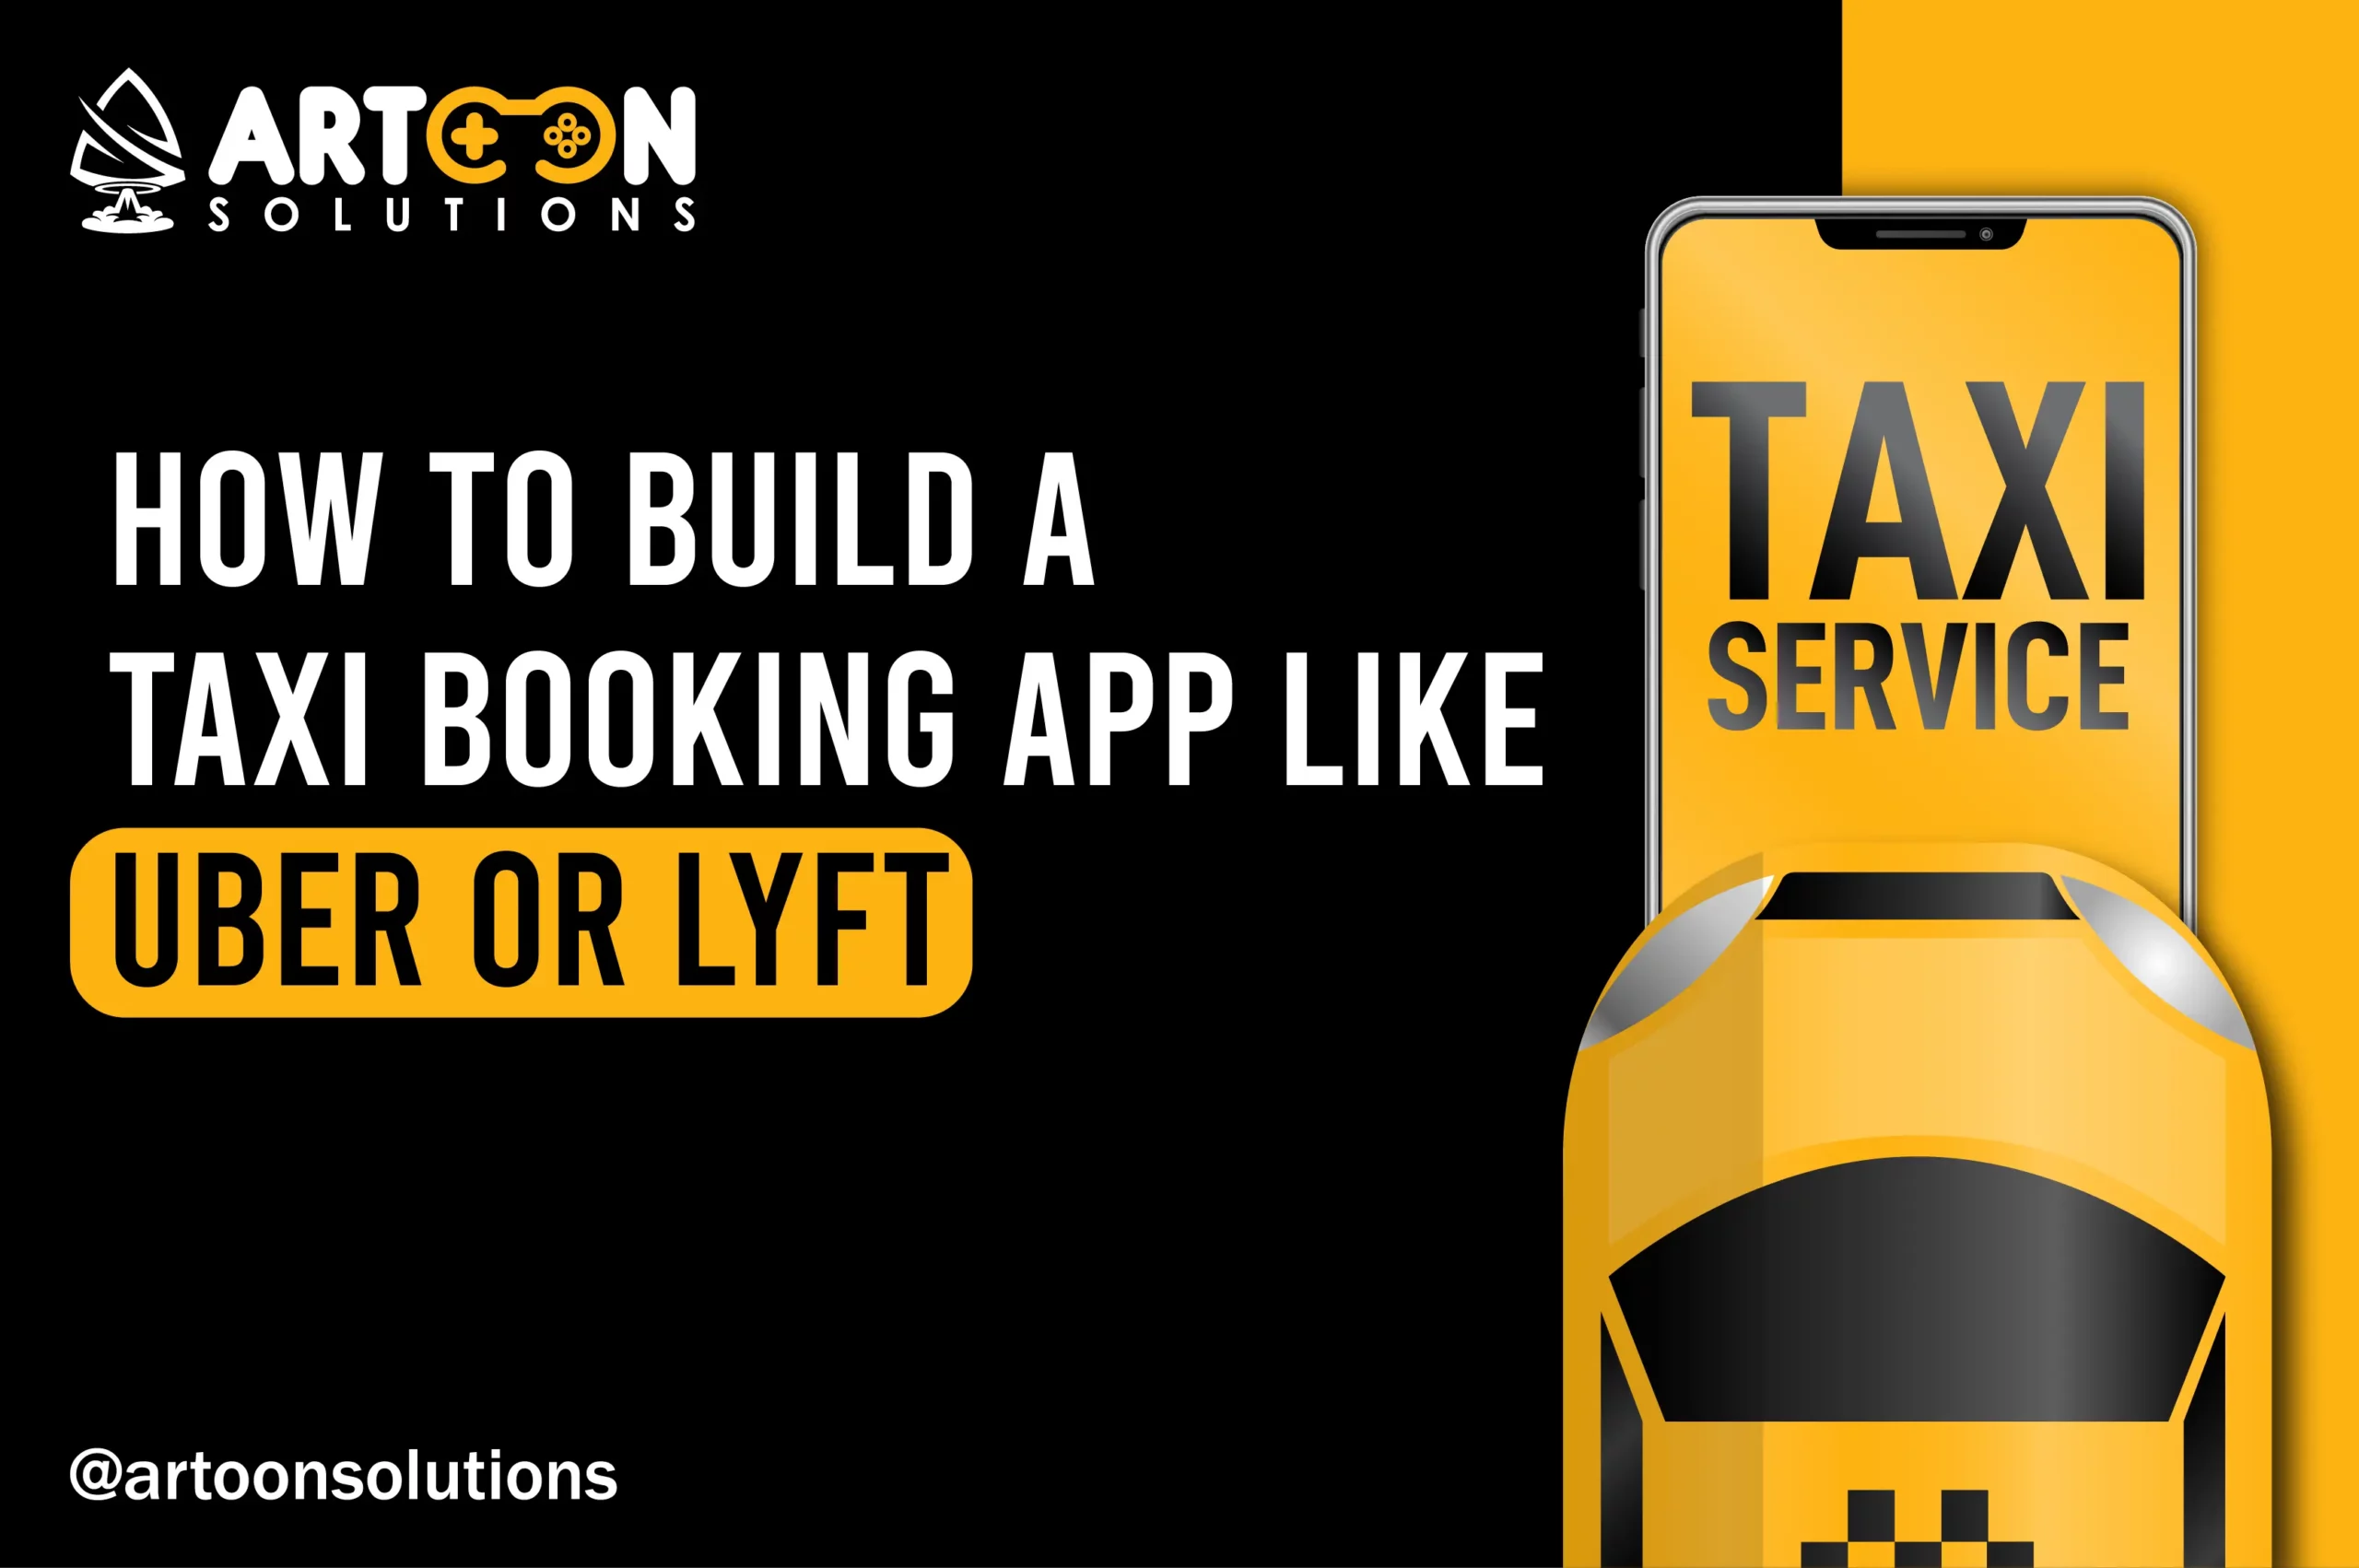 Taxi booking app like Uber